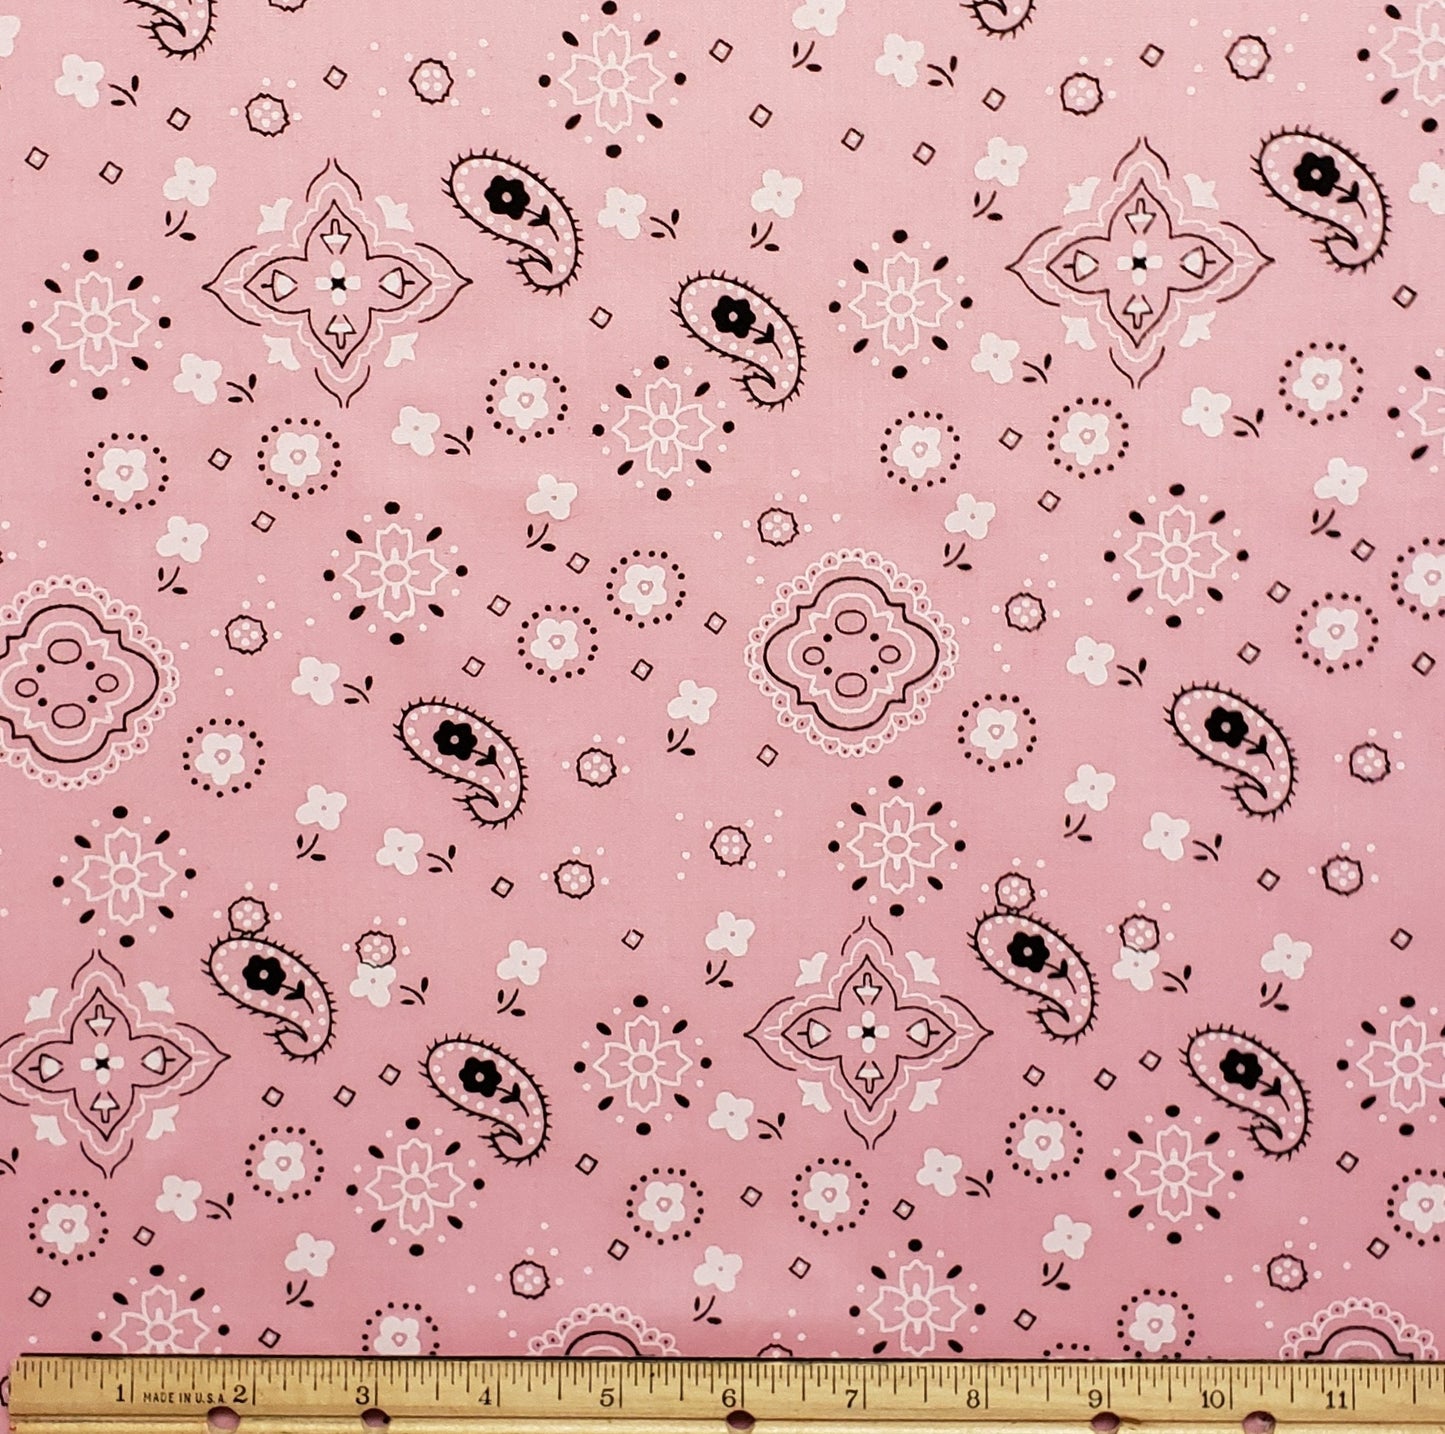 Red and Pink Marbled Tie-Dye Fabric - Selvage to Selvage Print – Tx2  Quilt Shop